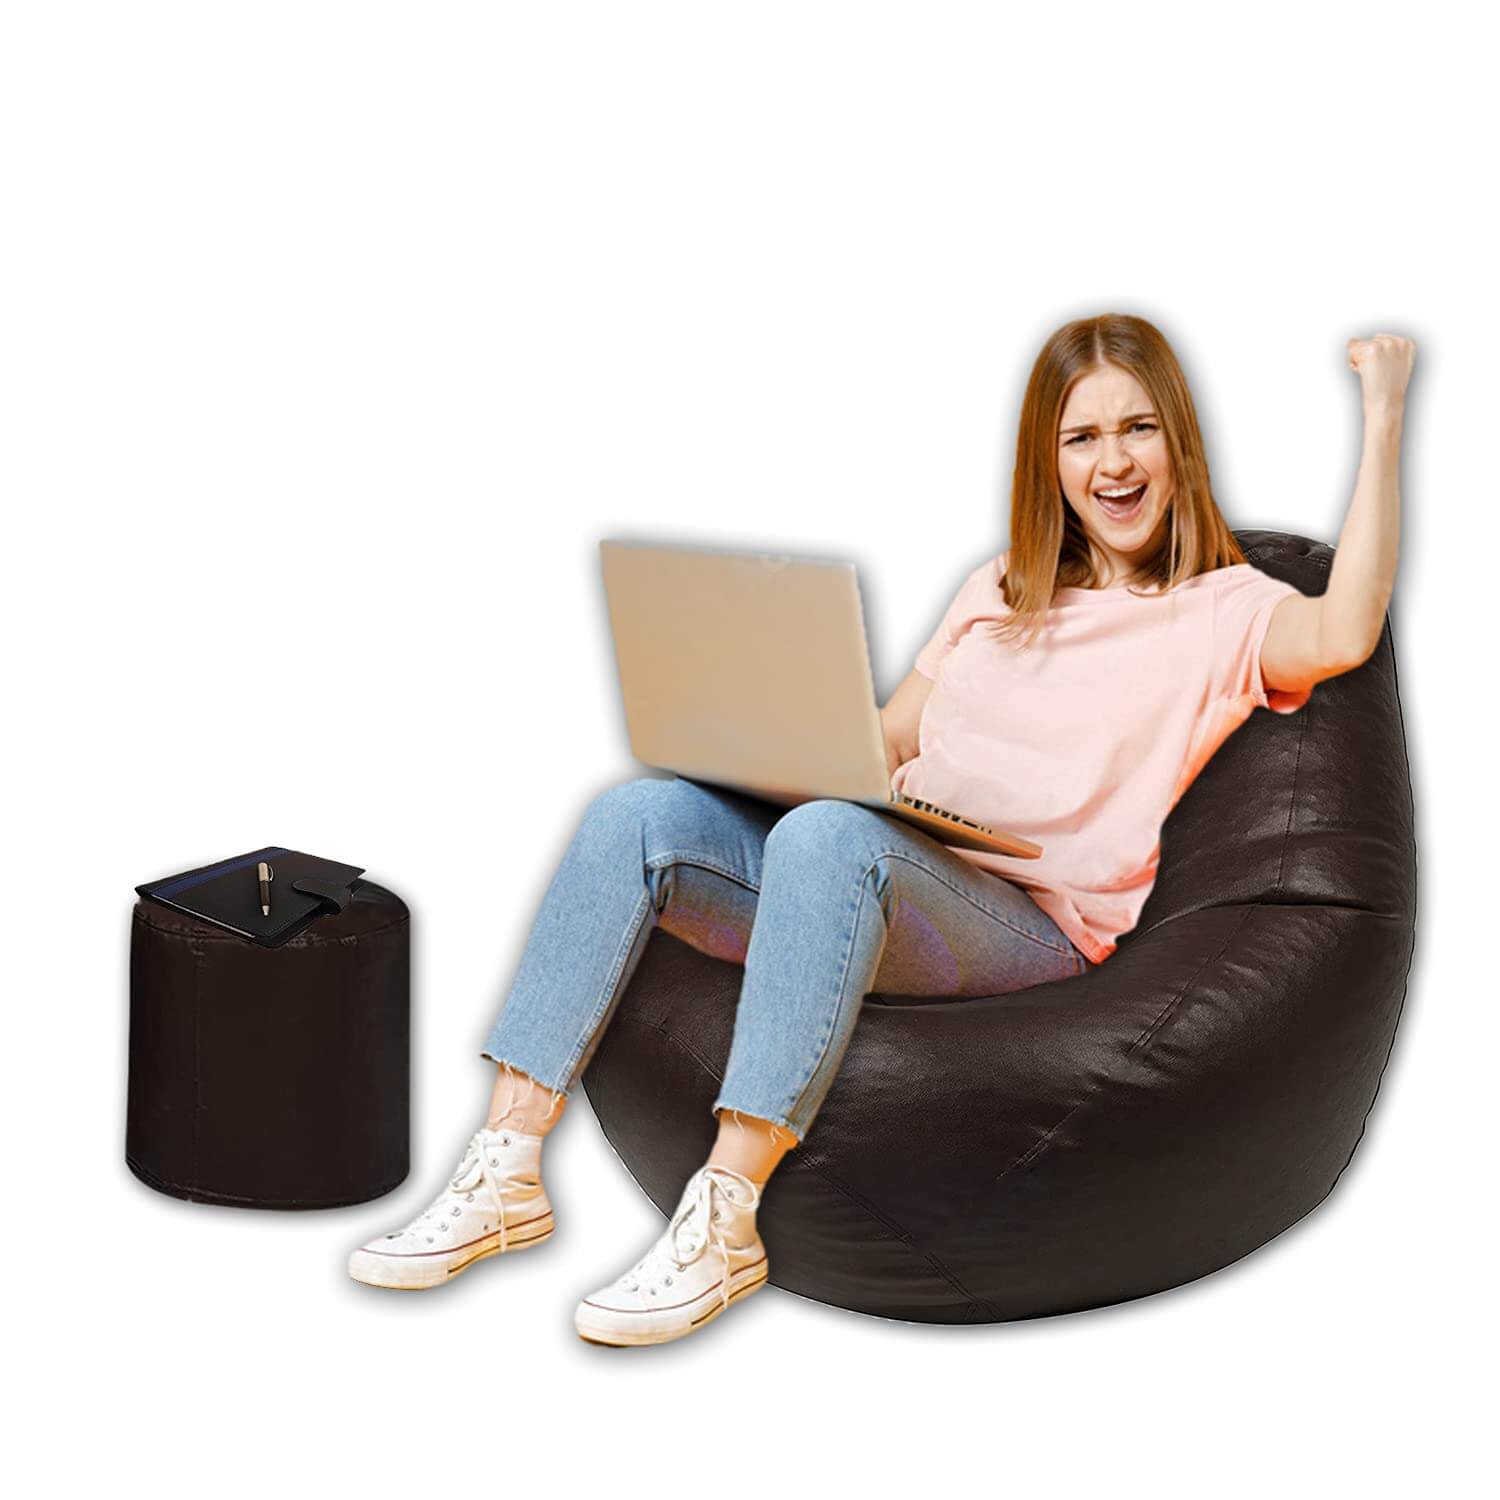 Dr Smith Bean Bags with Footrest Combo Filled with Beans